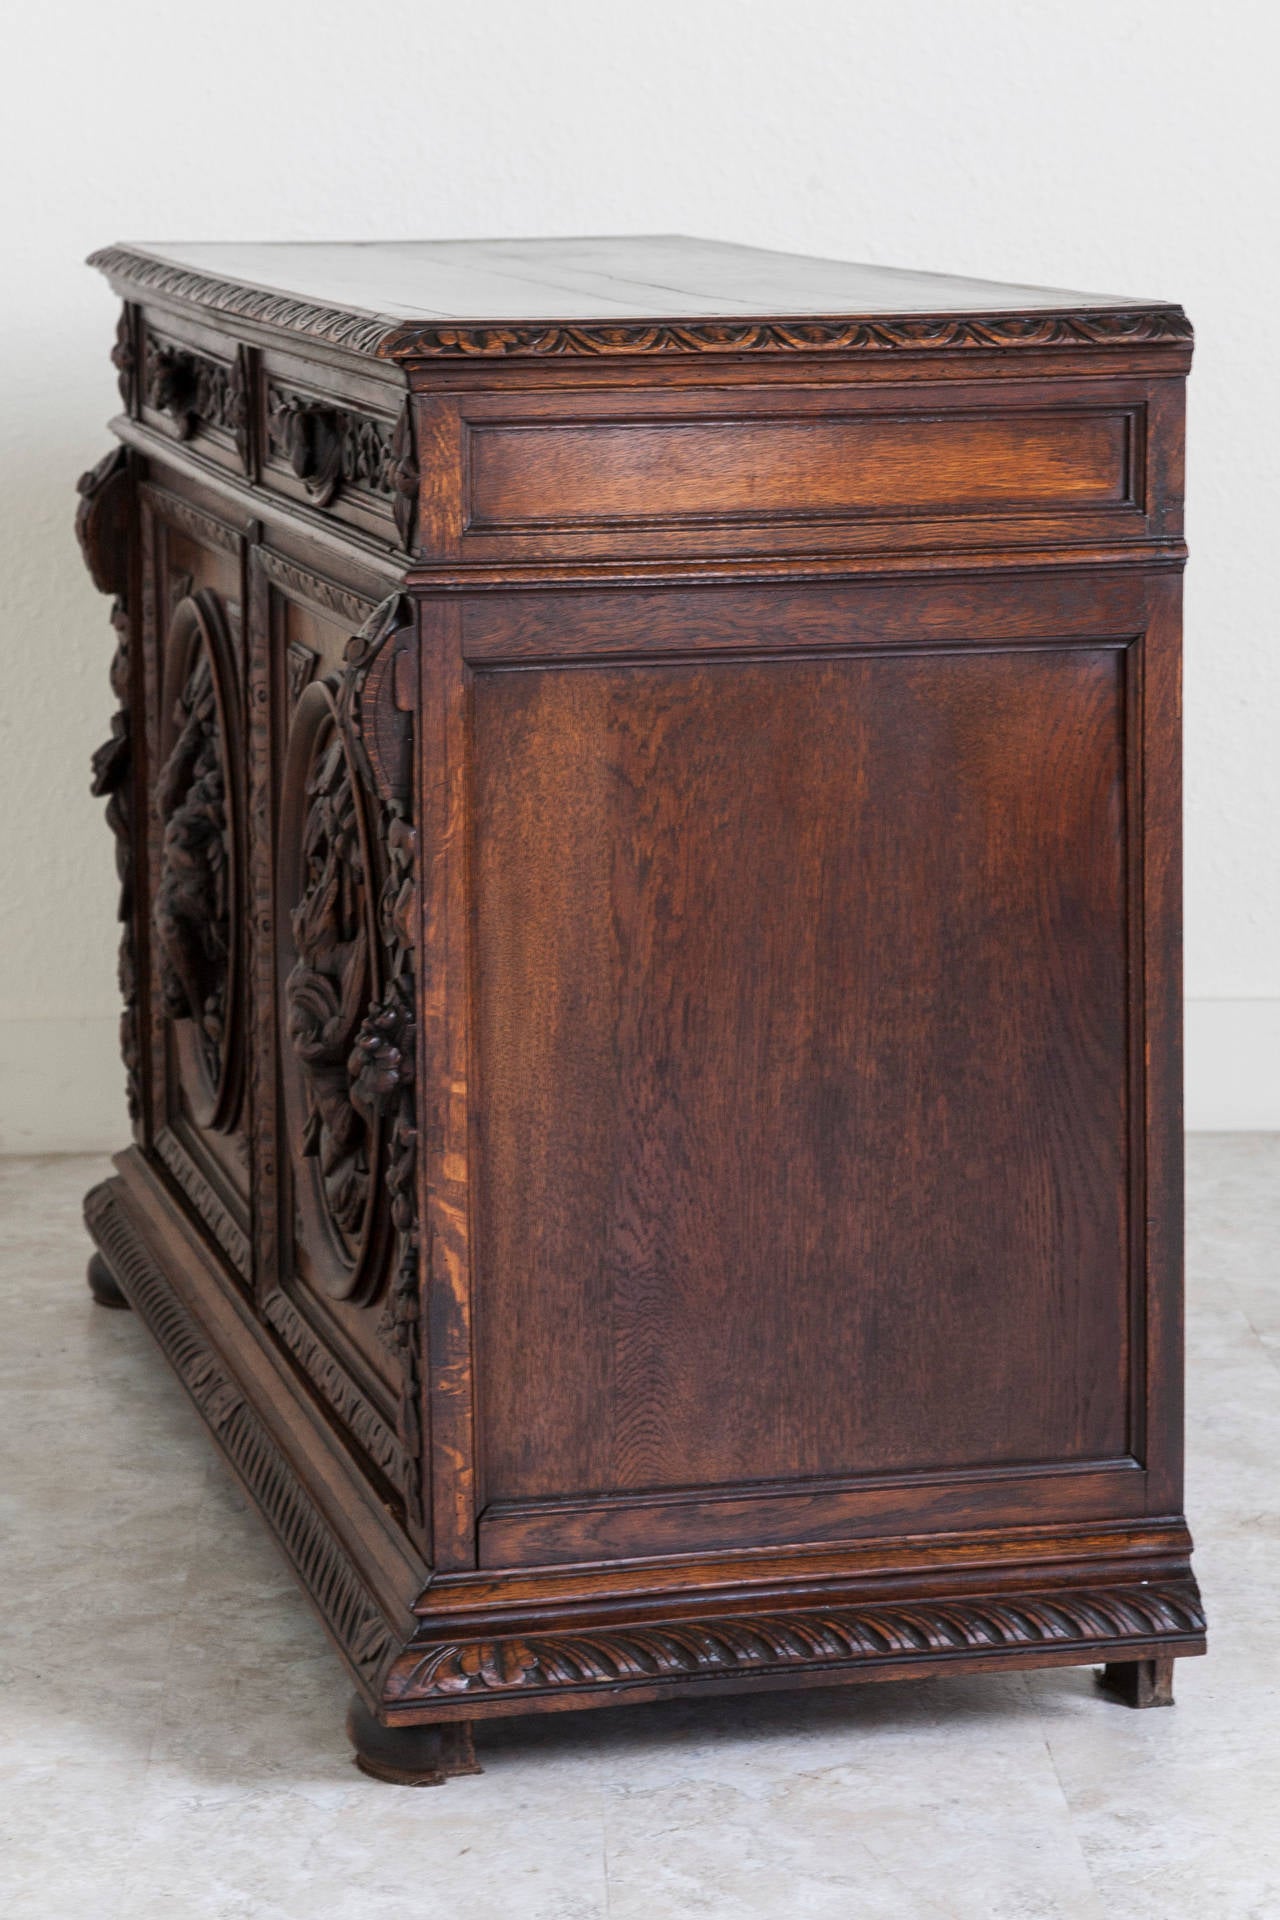 An incredible piece of work by a French artisan, this hand-carved oak Henri II style hunt buffet features wild hare, game birds, fruits and nuts. Behind the deep relief on its doors this piece has a wide open cabinet space with central shelf. Its